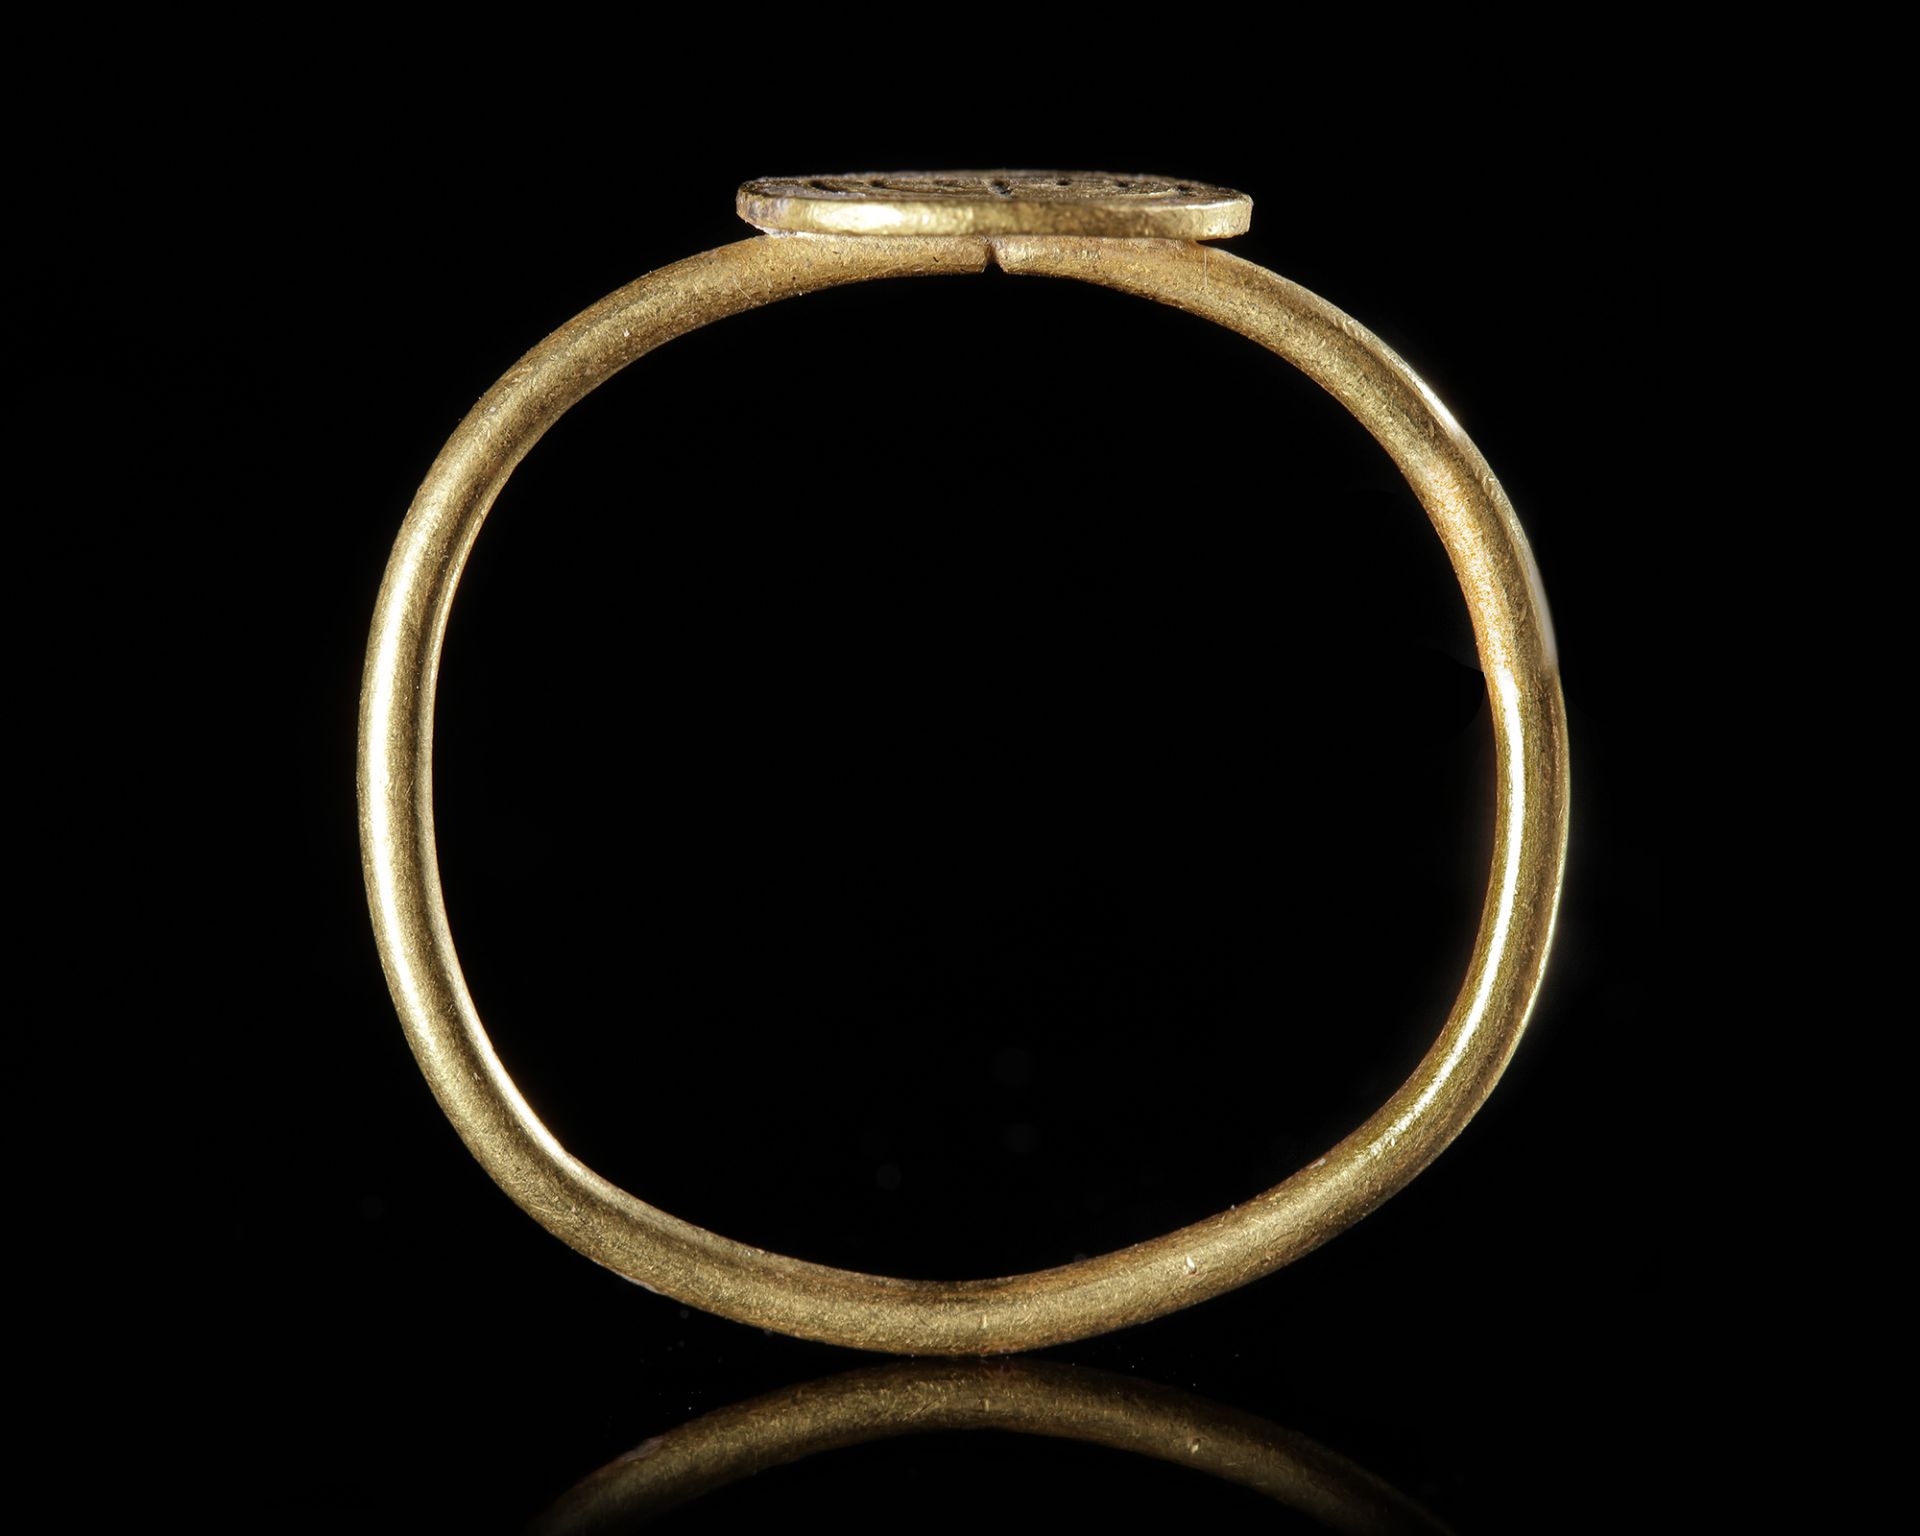 A BYZANTINE GOLD RING WITH MENORAH, 6TH-7TH CENTURY AD - Image 2 of 3